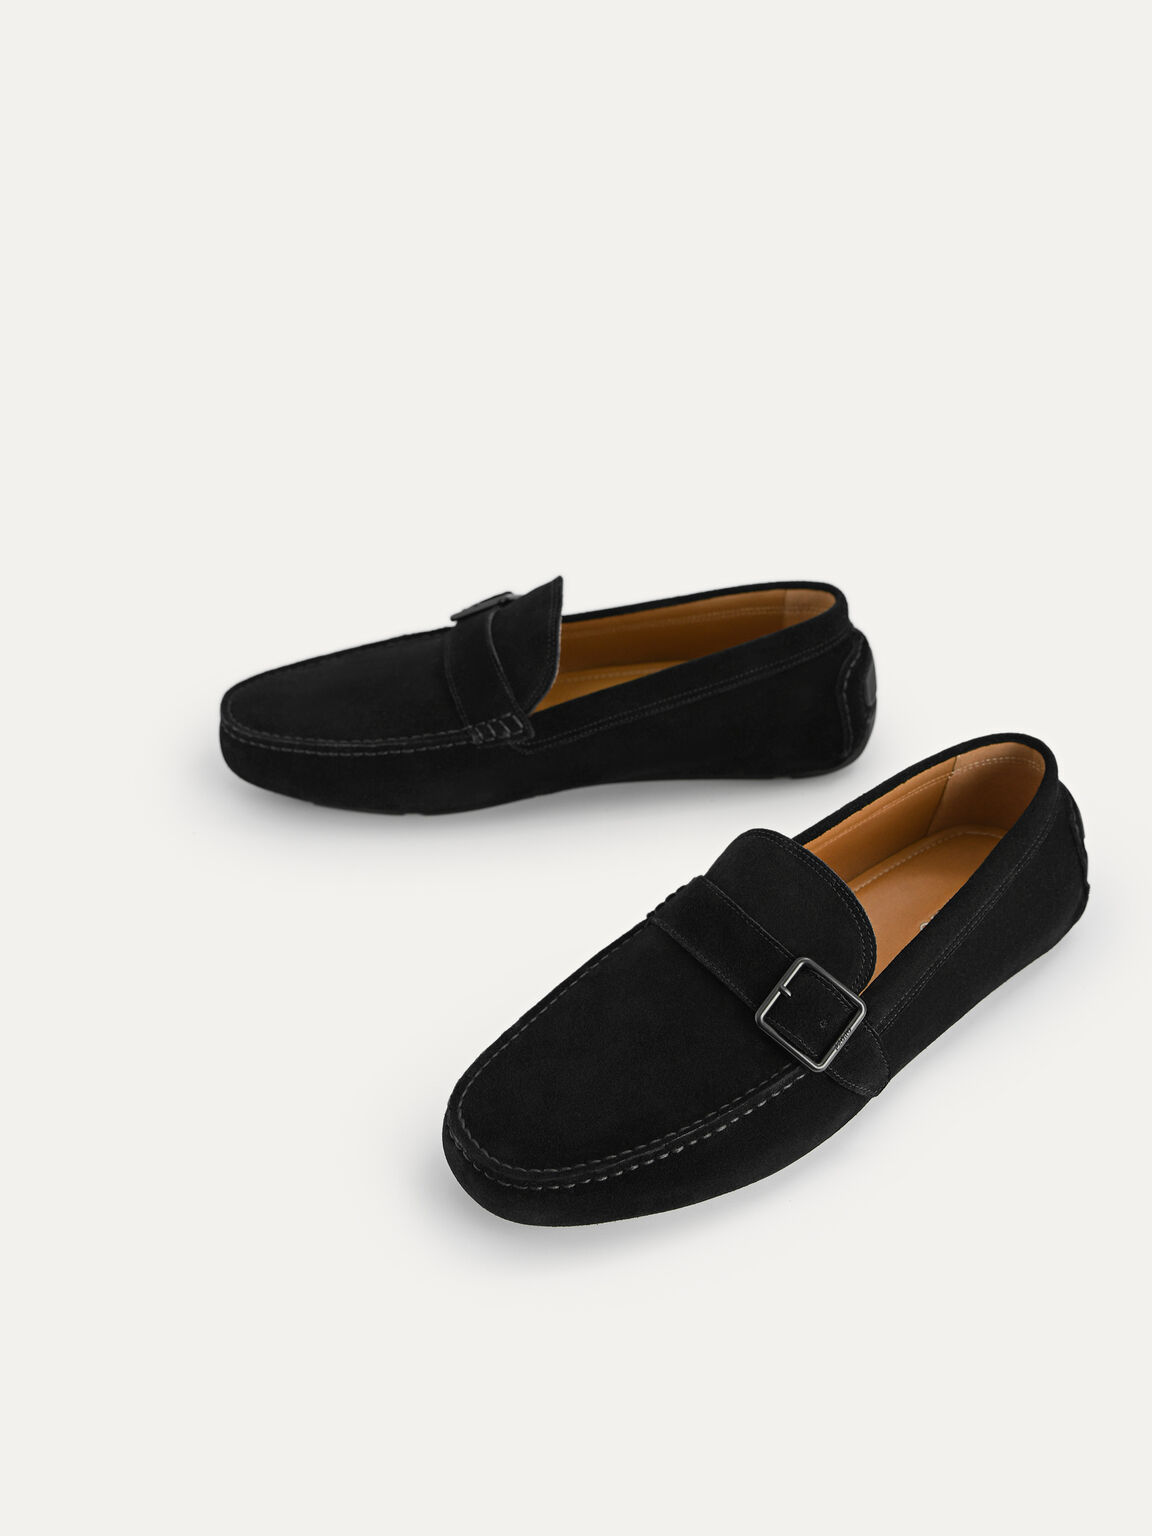 Suede Leather Moccasins with Buckle Detailing, Black